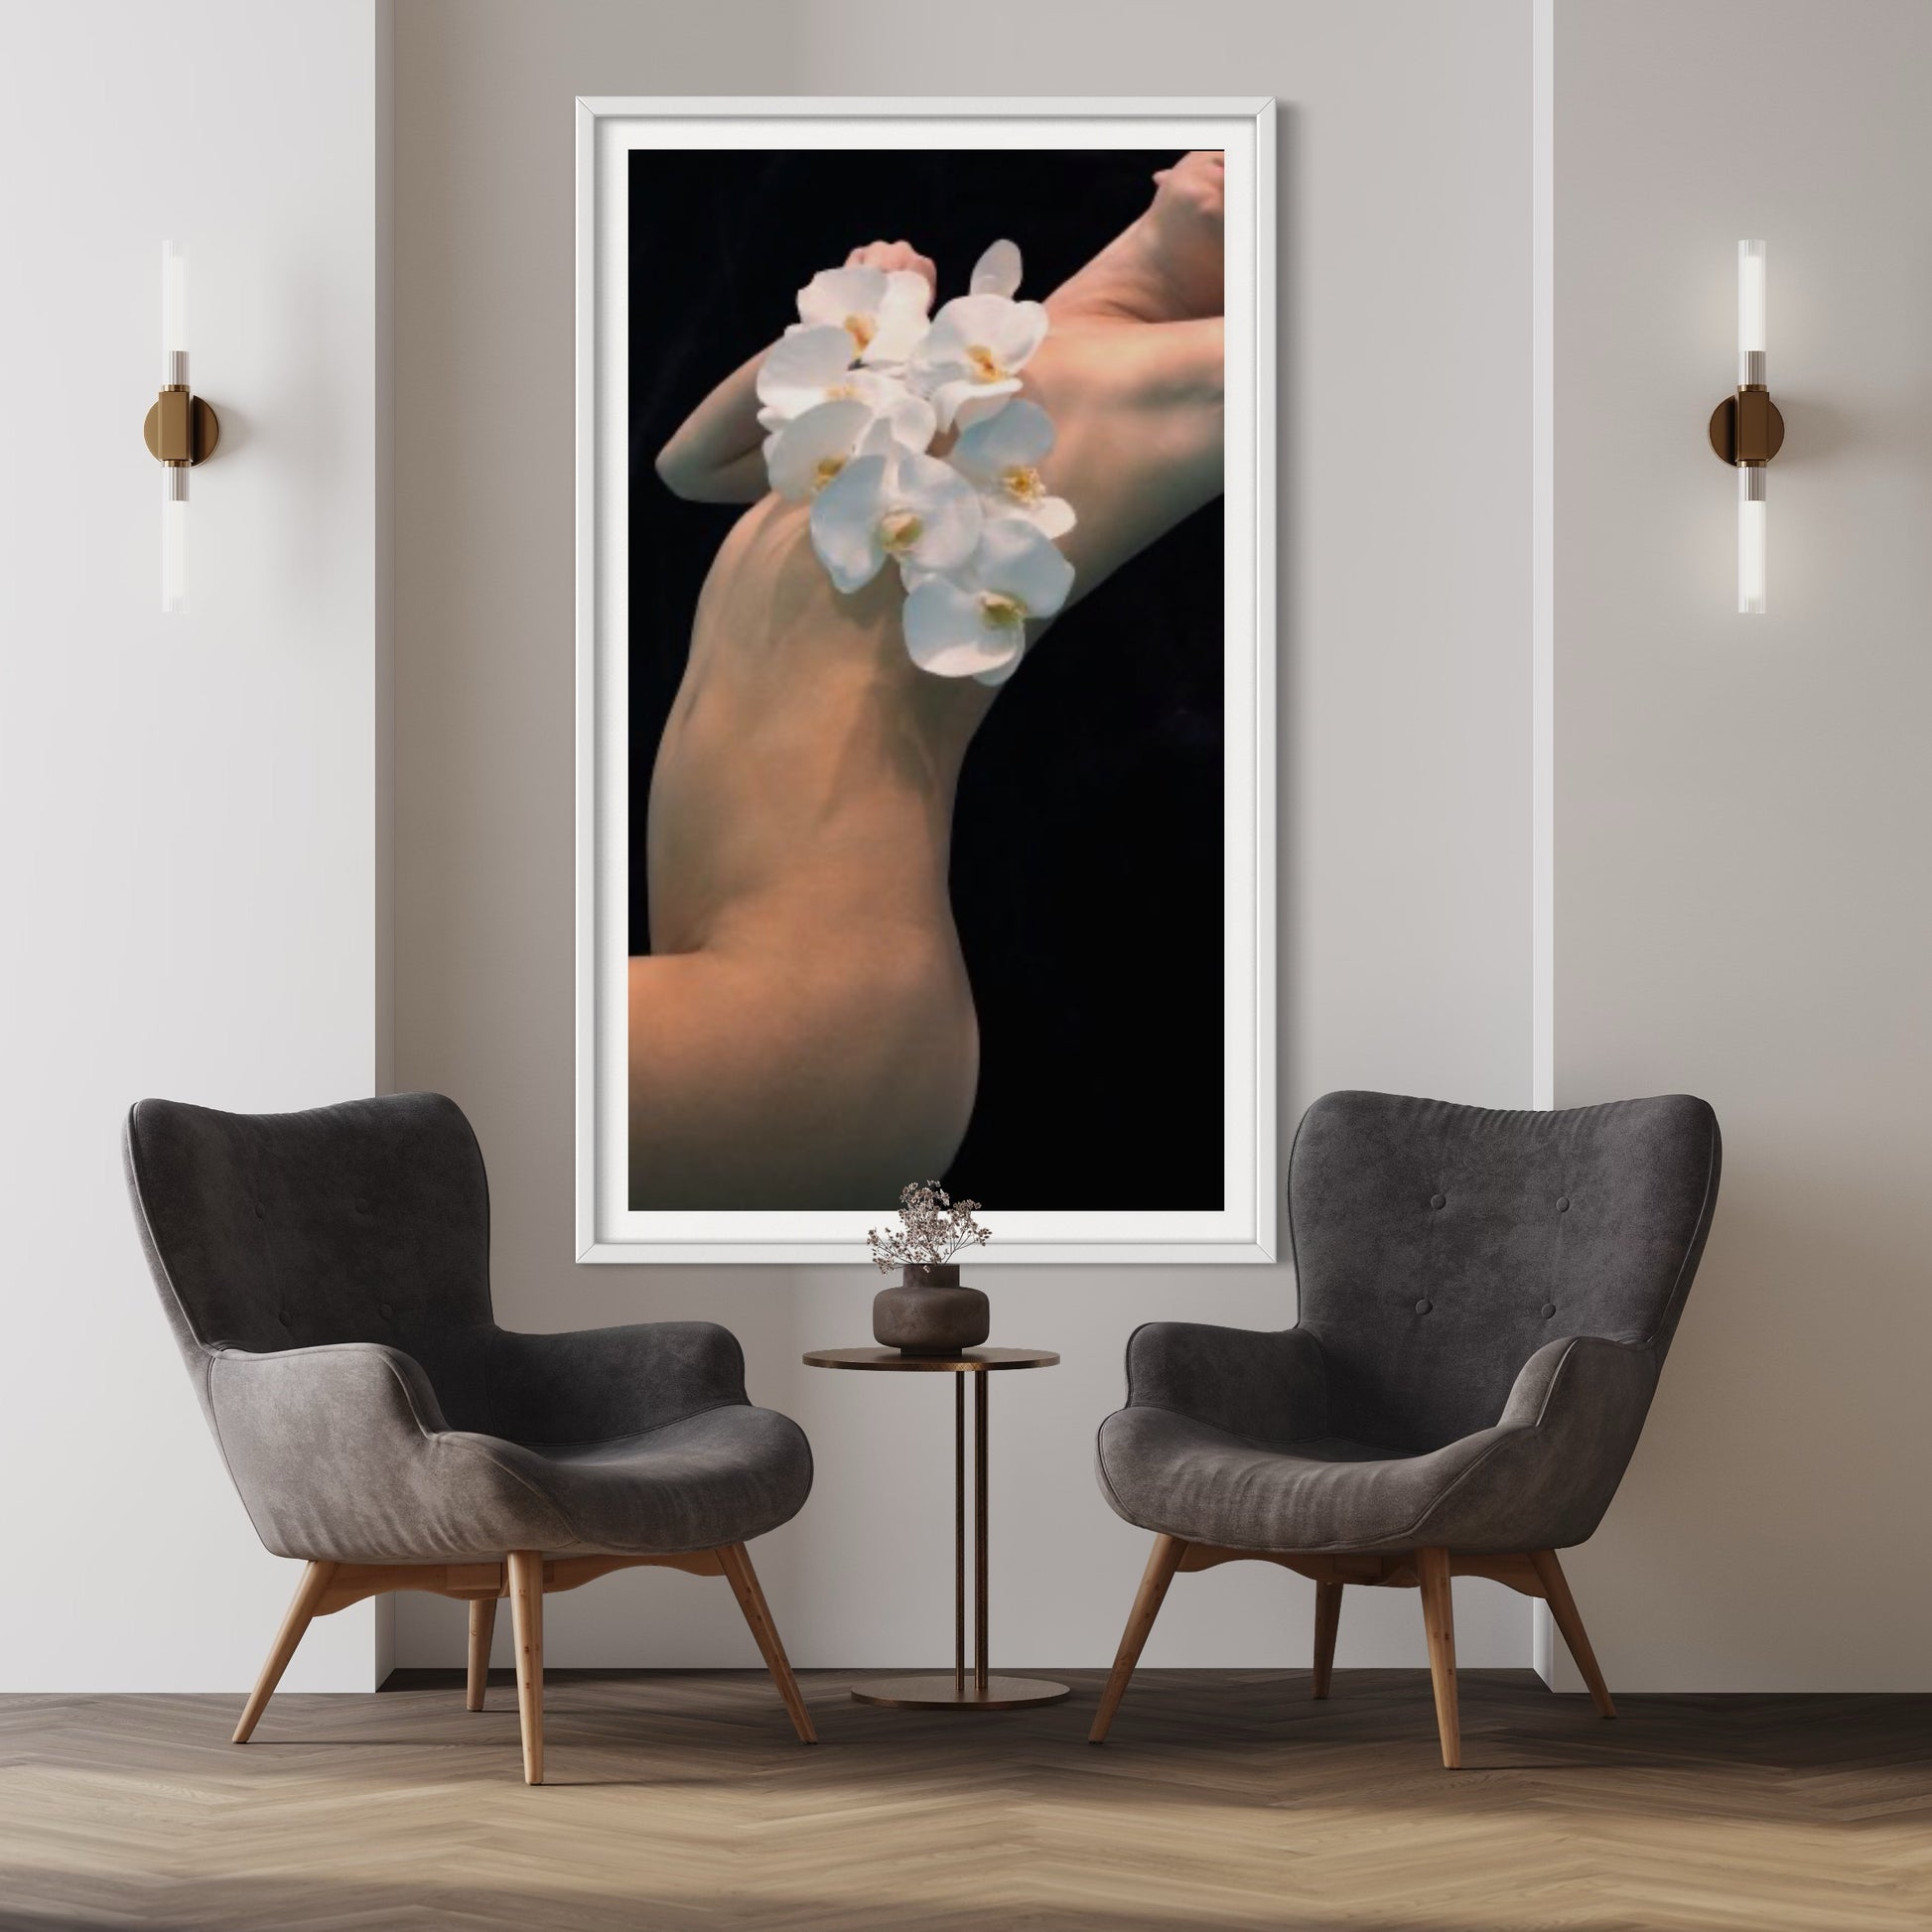 Orchid by Liesel.Art: A serene image of a beautiful girl floating in water, gracefully holding a white orchid, creating a tranquil and enchanting scene."